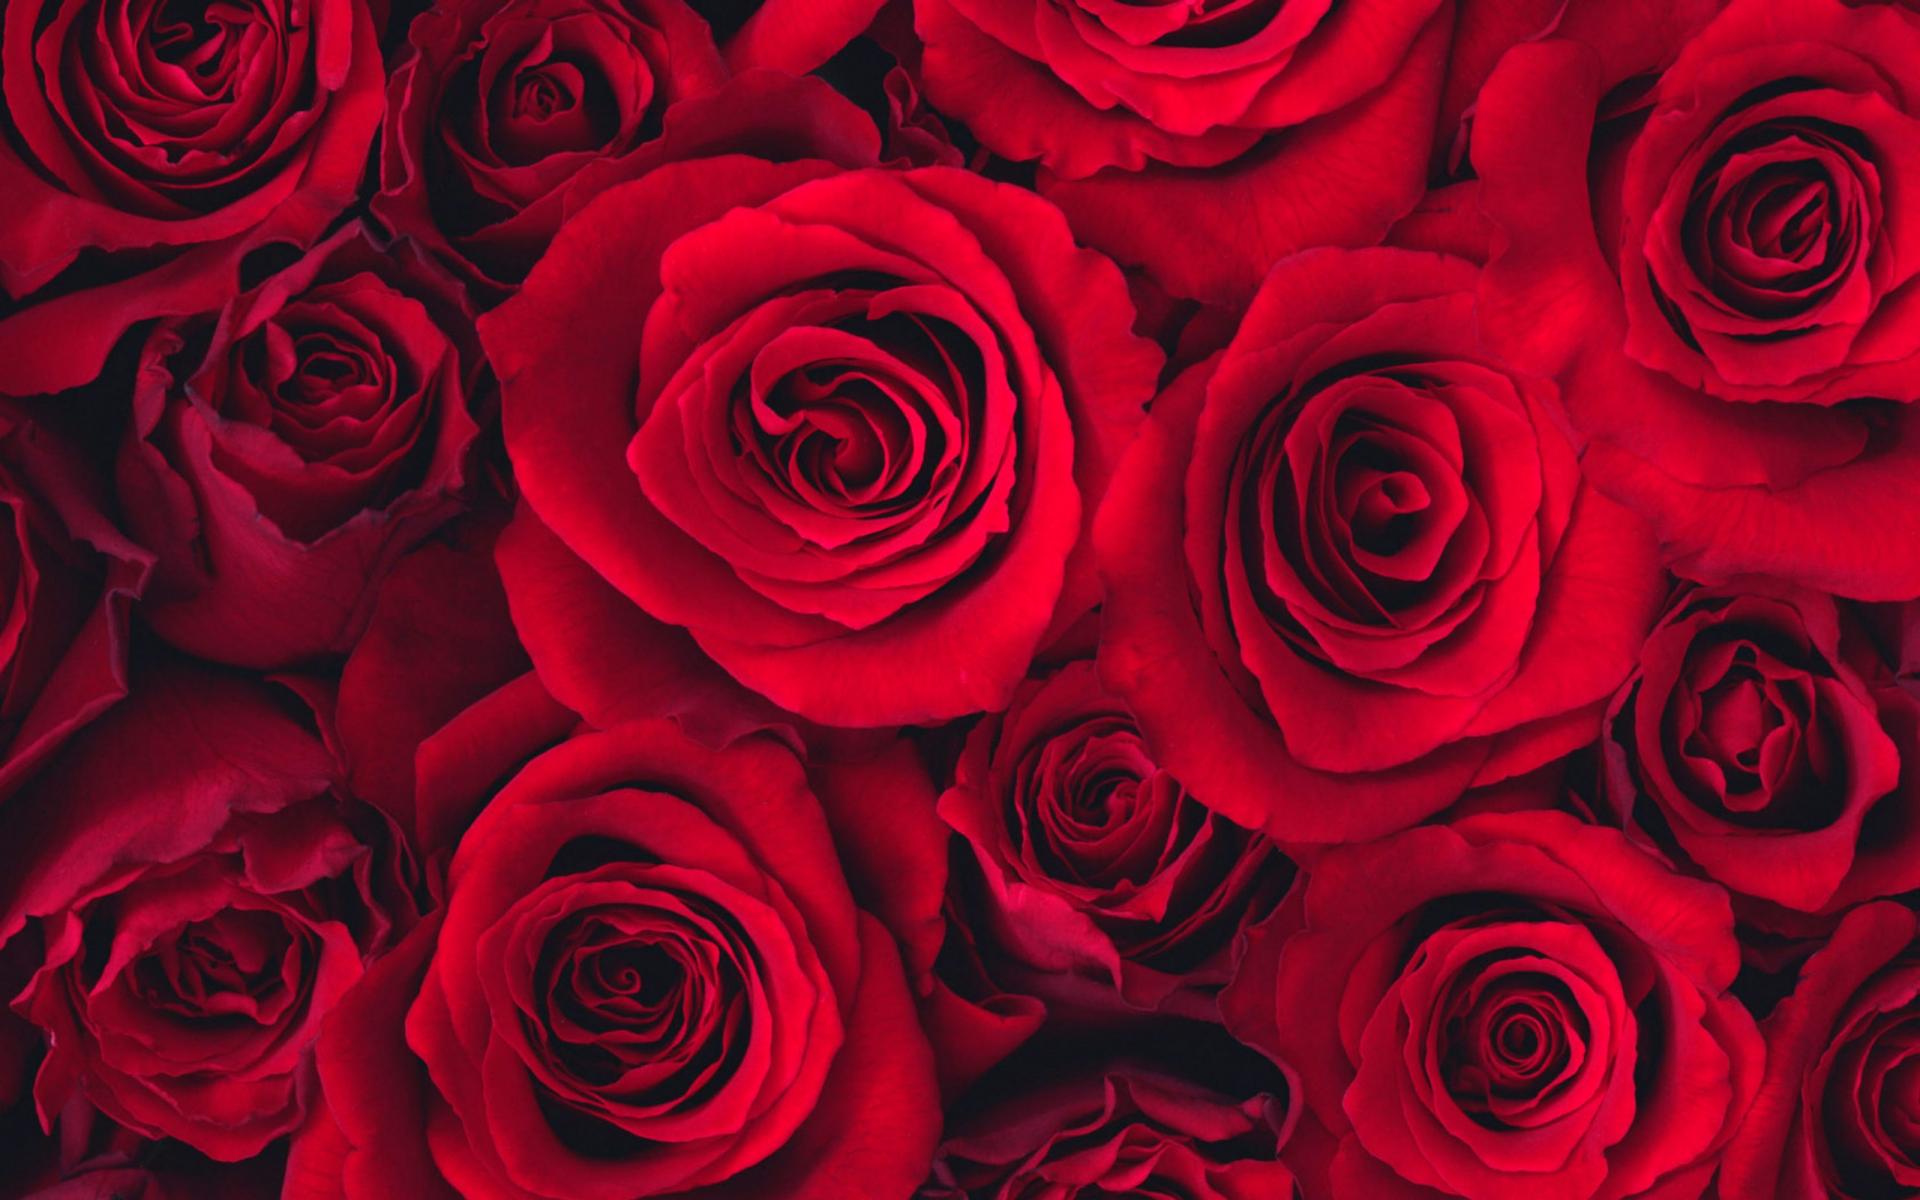 February Trivia Questions And Answers Red roses